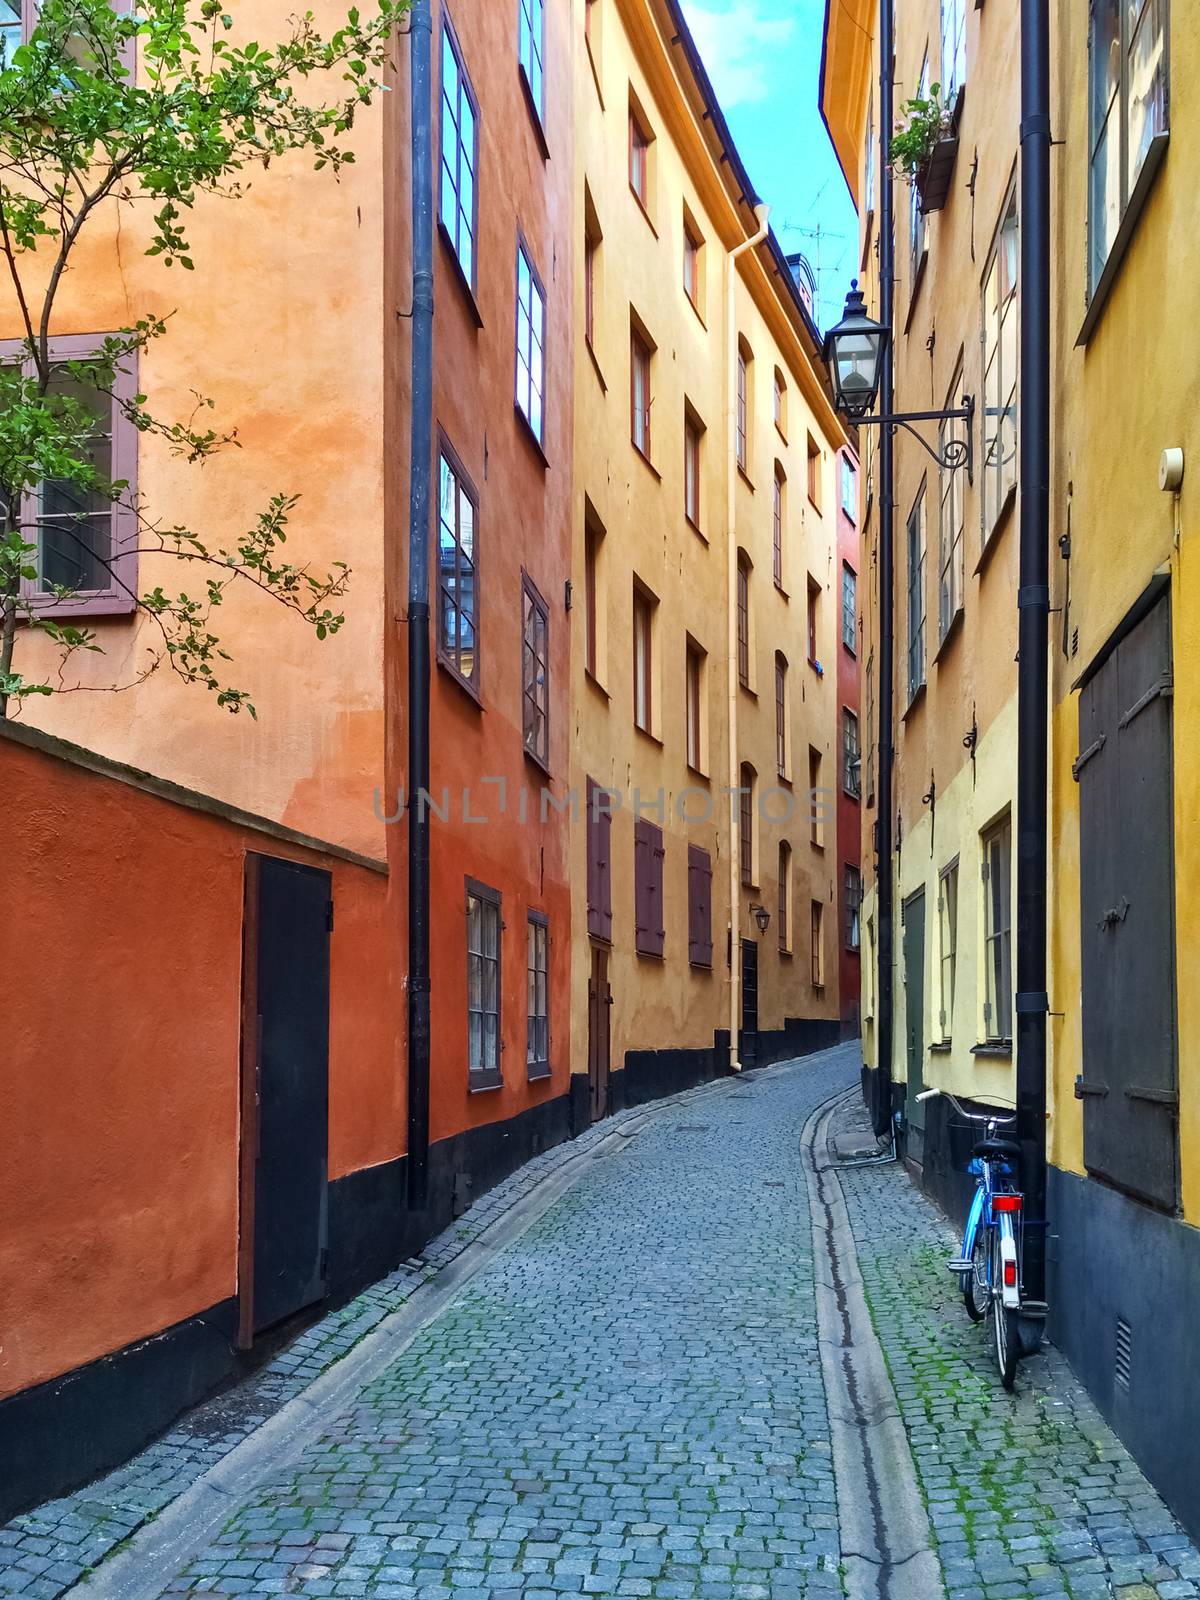 Narrow street with colorful buildings in Gamla Stan, historic center of Stockholm.